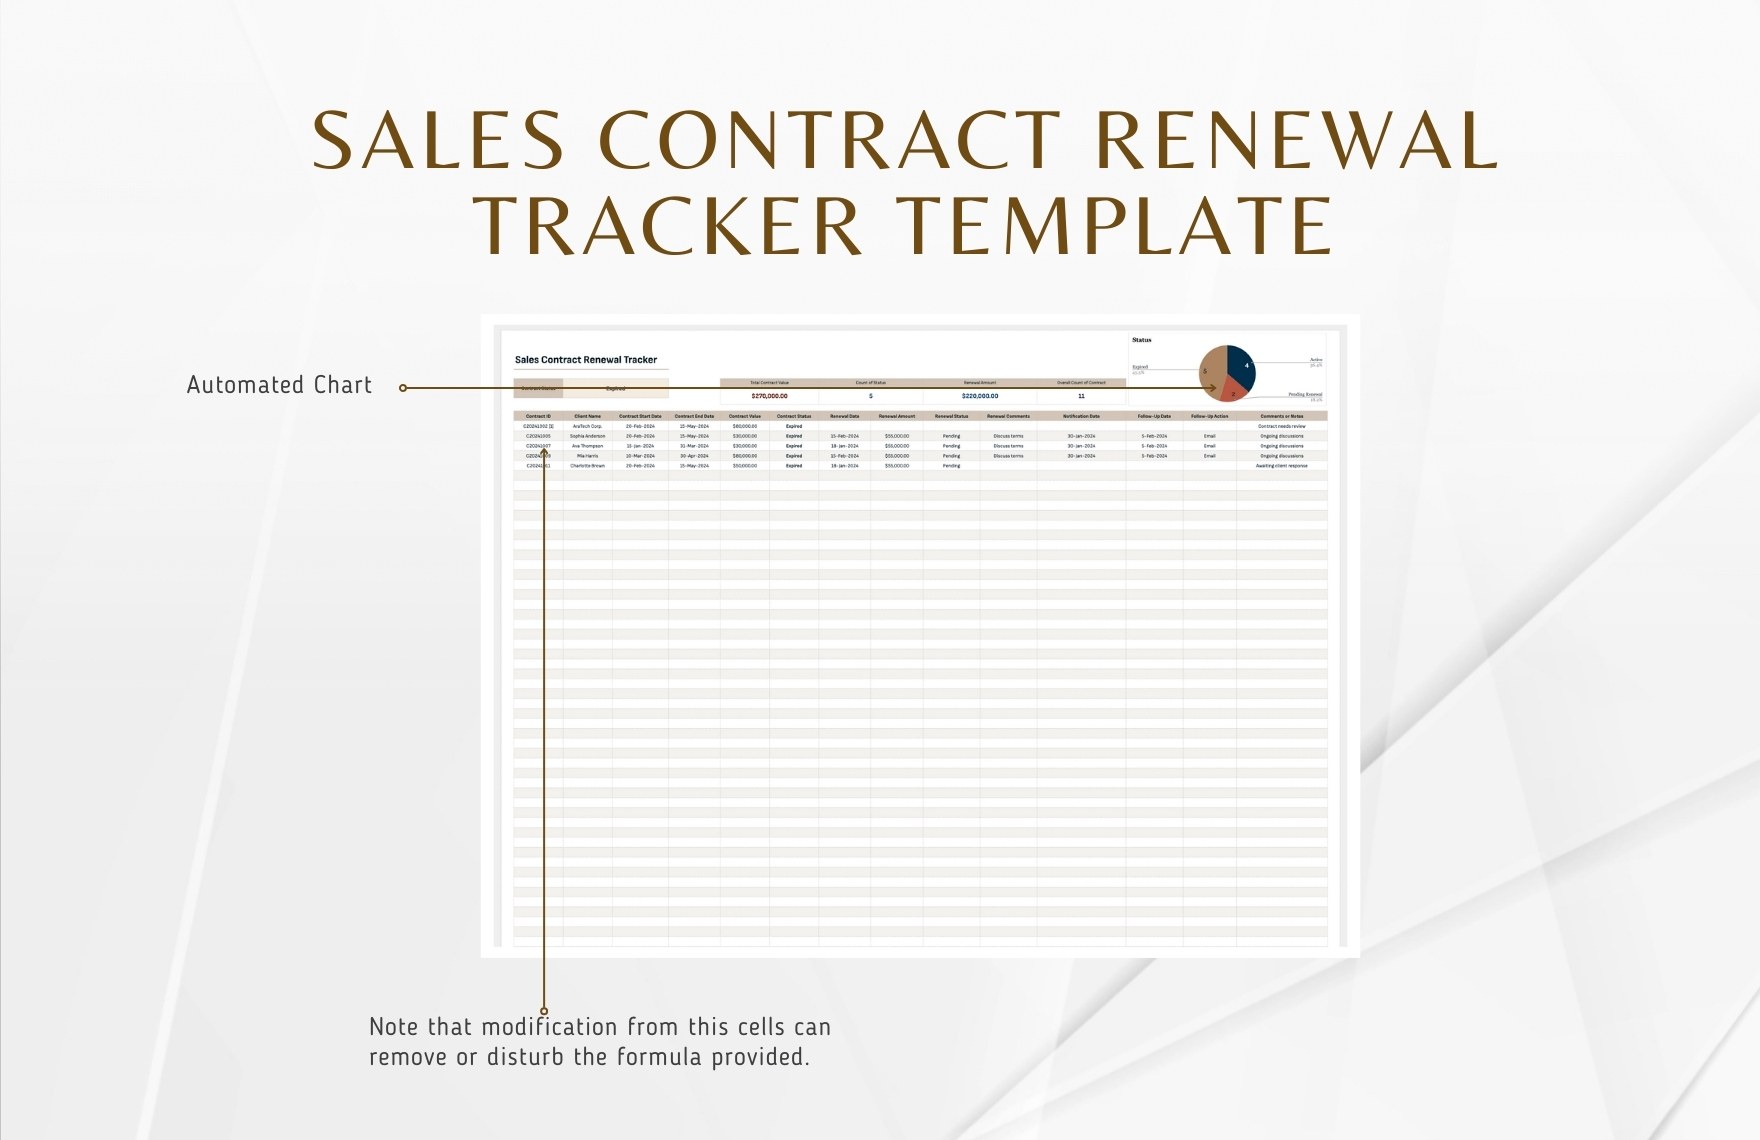 Sales Contract Renewal Tracker Template